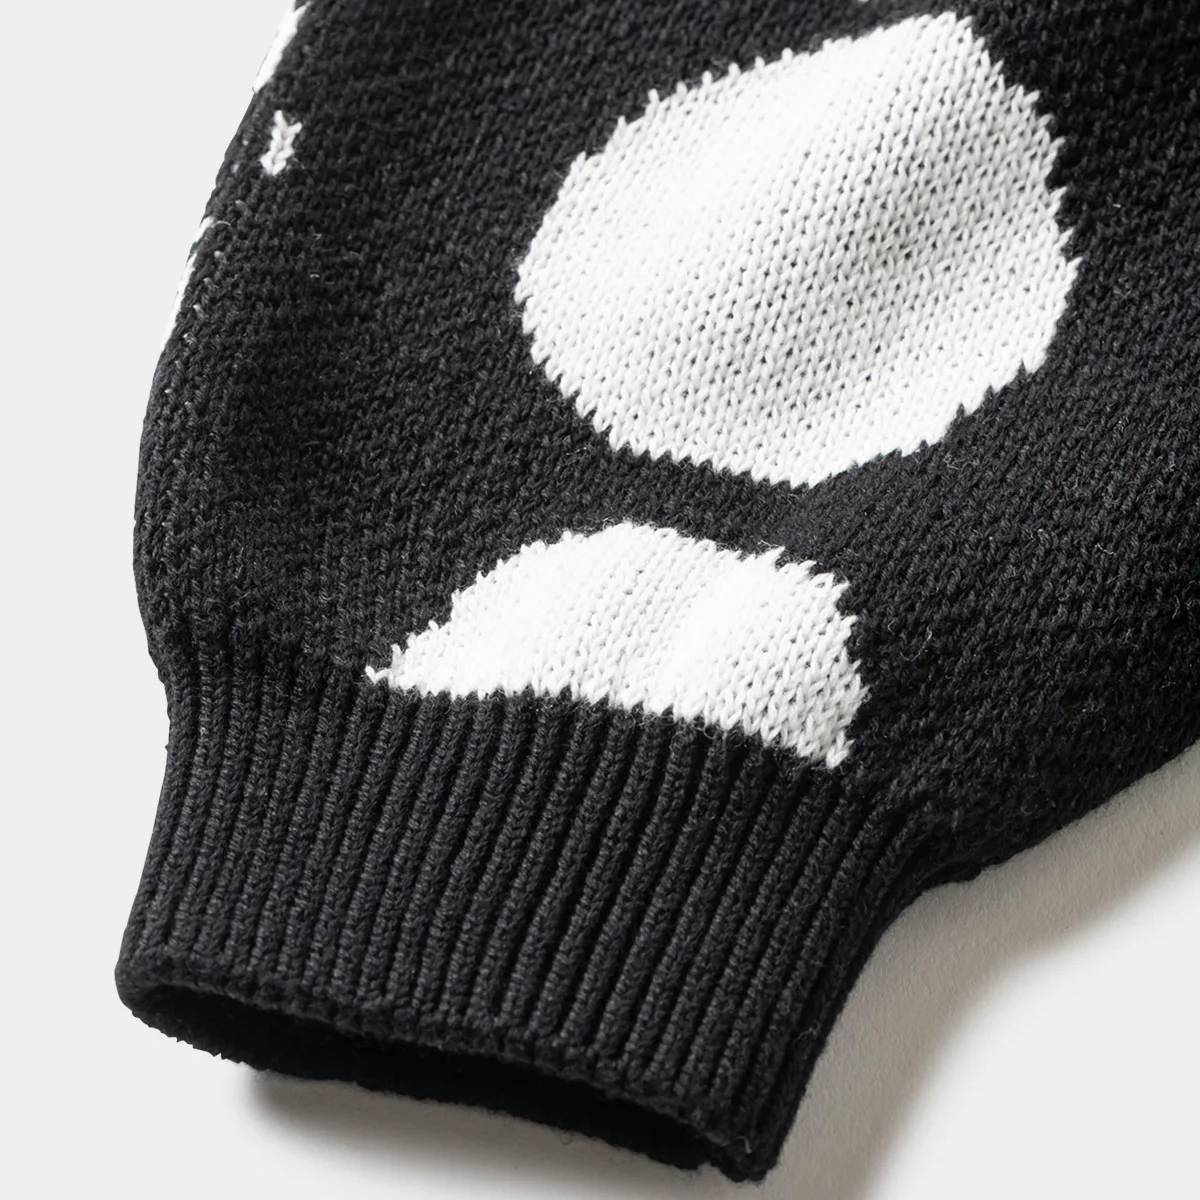 TIGHTBOOTH - COVID-19 Knit Sweater